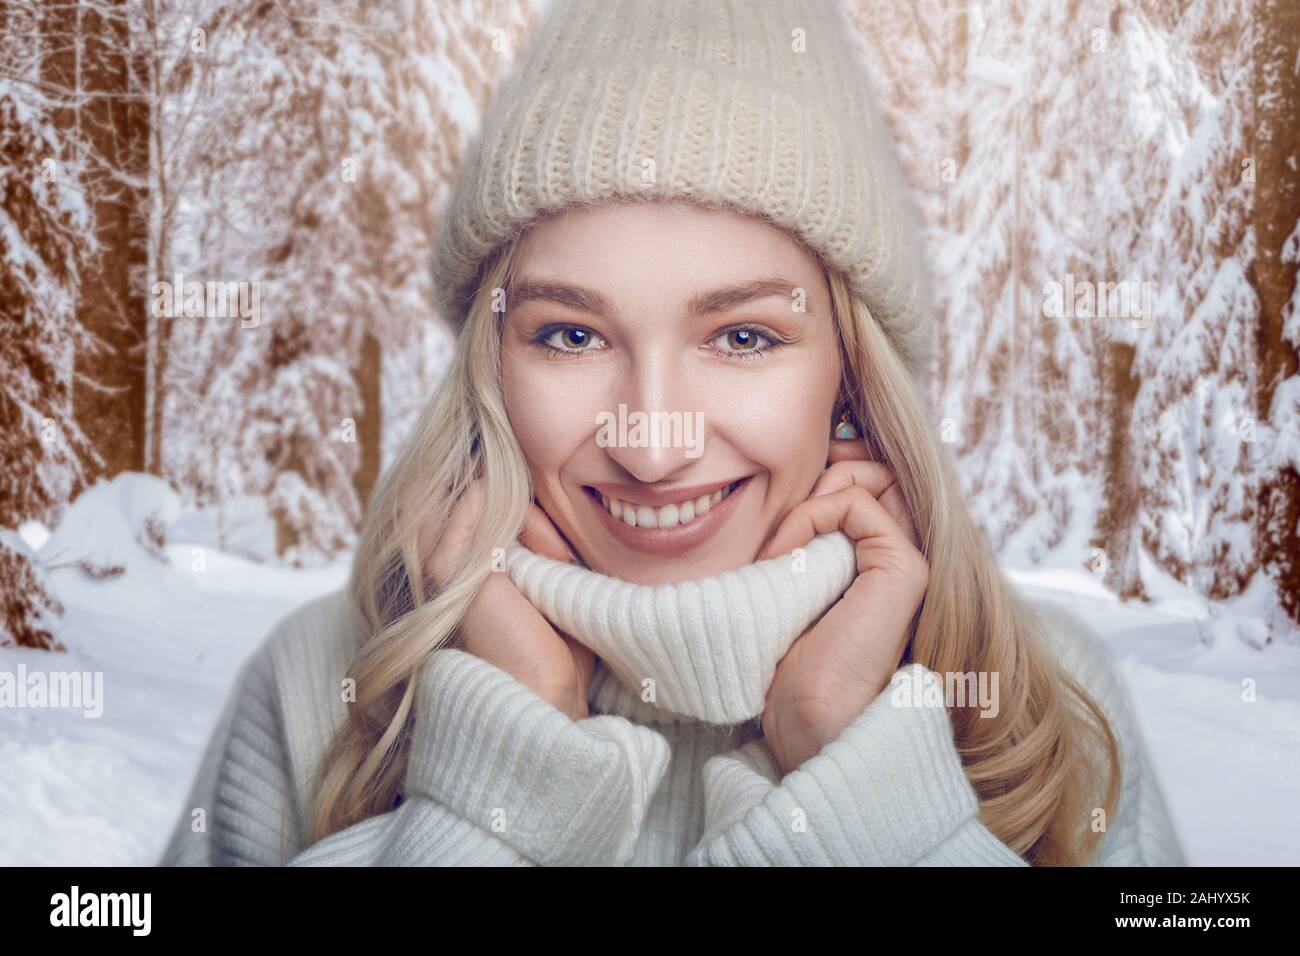 Attractive blond woman in a warm woollen polo neck sweater and knitted cap standing outdoors snuggling into the collar with a wide happy friendly smil Stock Photo